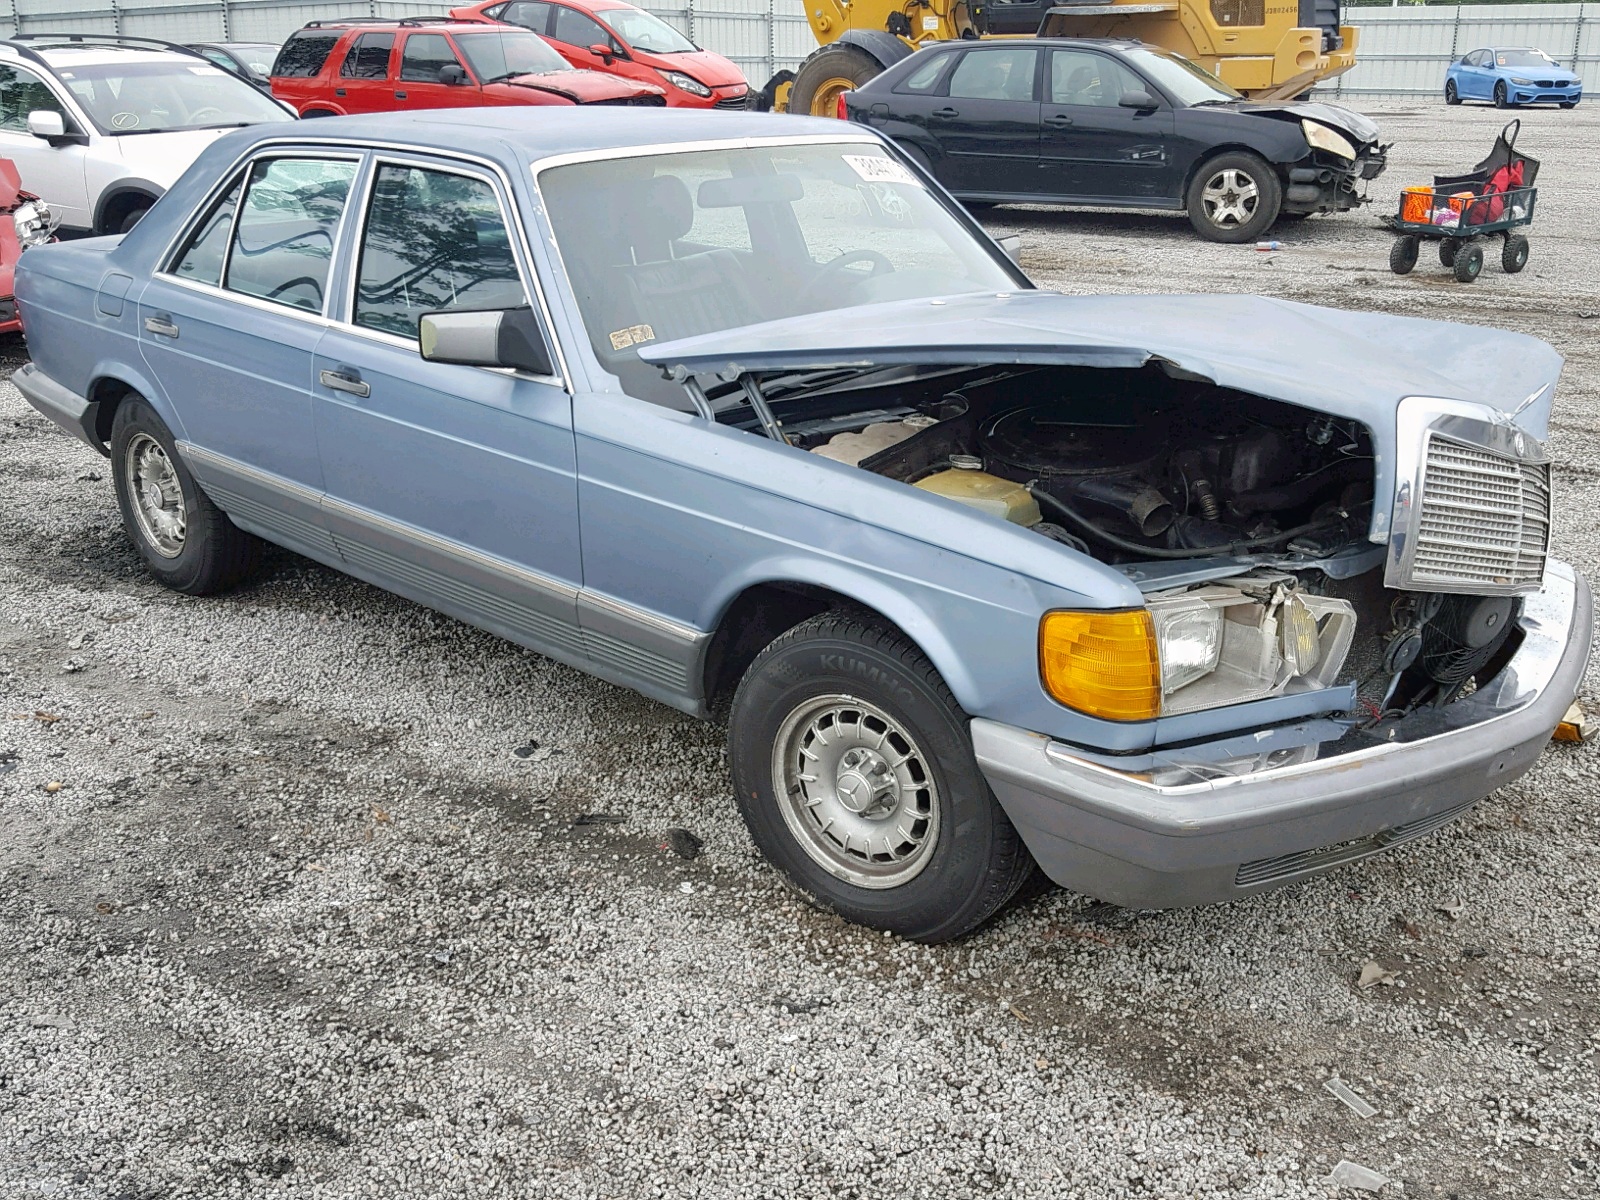 1985 mercedes benz 300 sd for sale at copart harleyville sc lot 38447029 salvagereseller com 1985 mercedes benz 300 sd for sale at